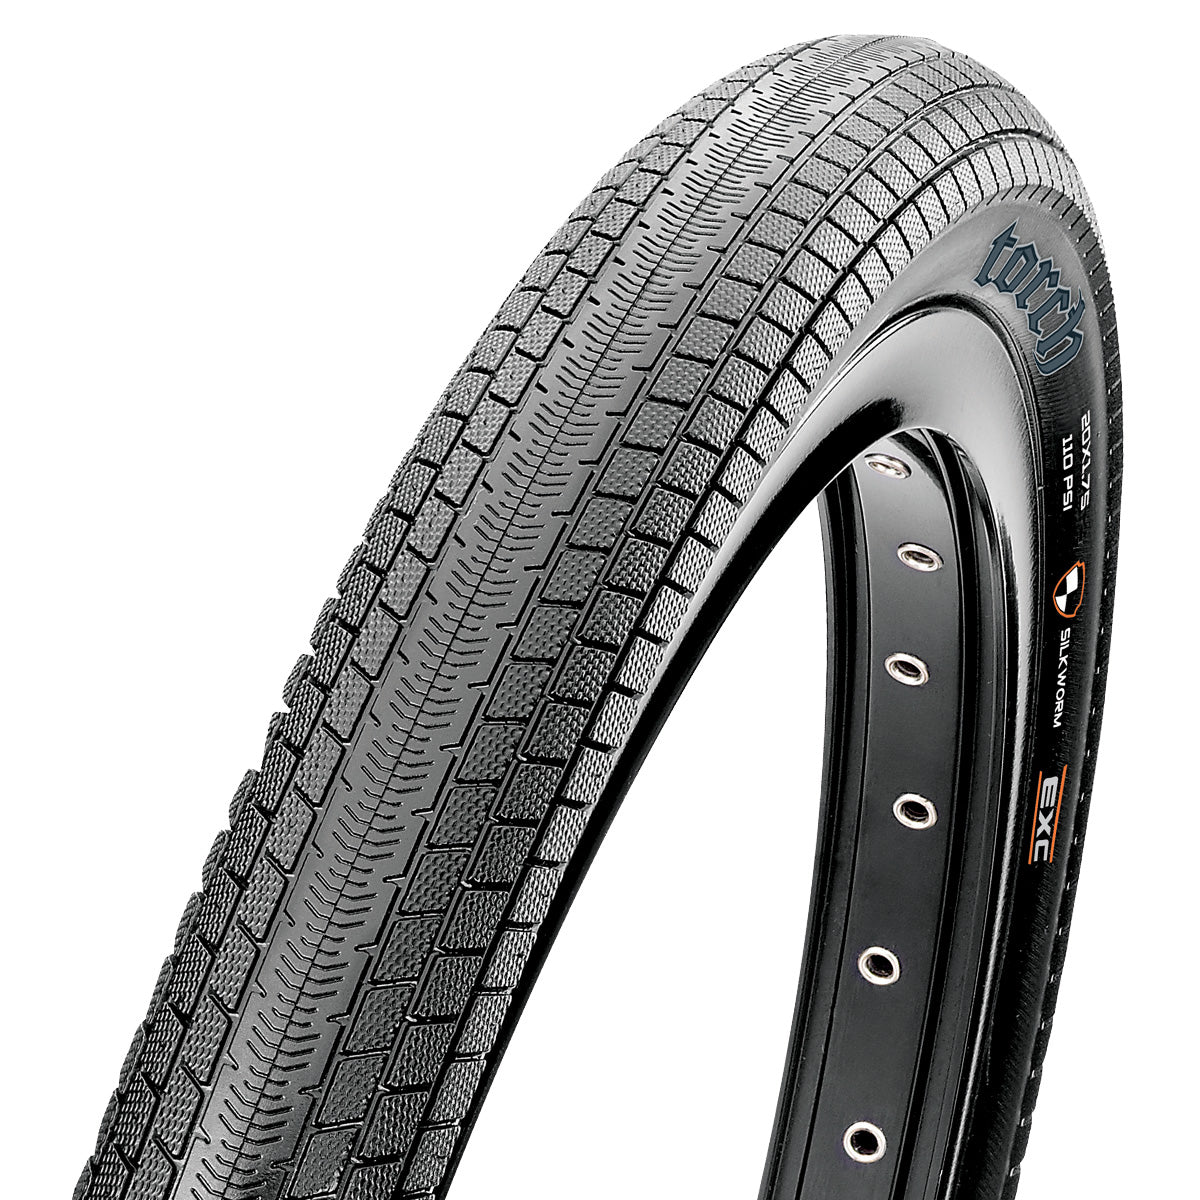 Maxxis Torch Foldable 20" EXO/TR Tire